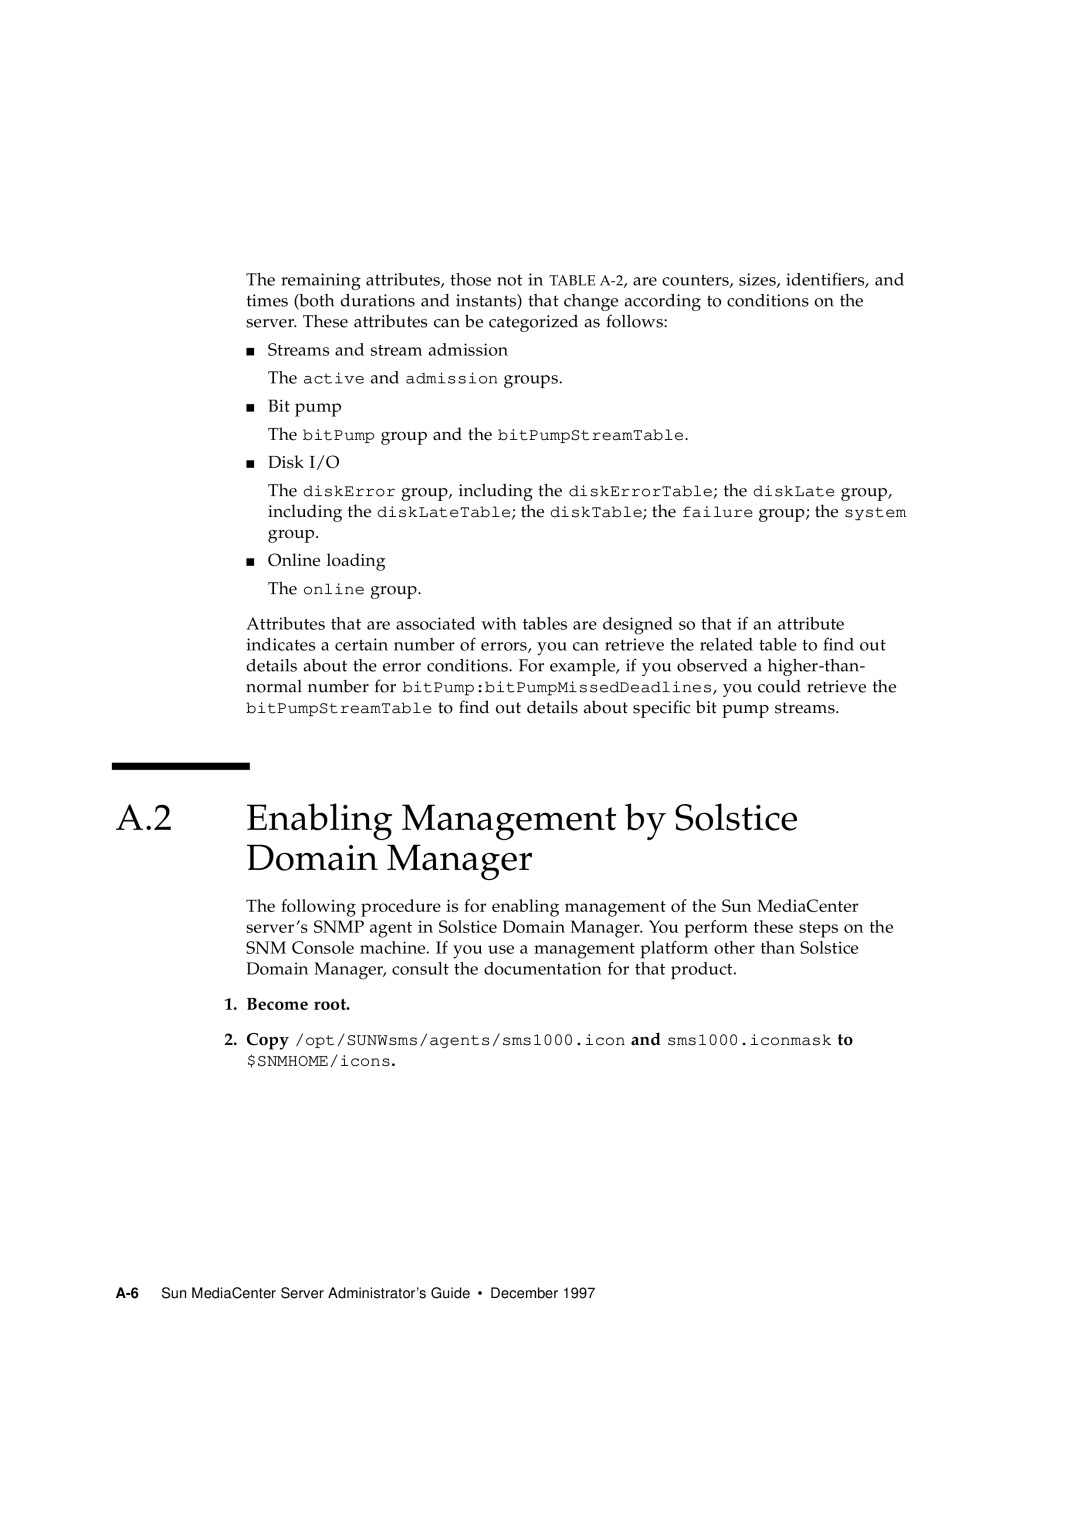 Sun Microsystems 2.1 manual A.2 Enabling Management by Solstice Domain Manager, Become root 